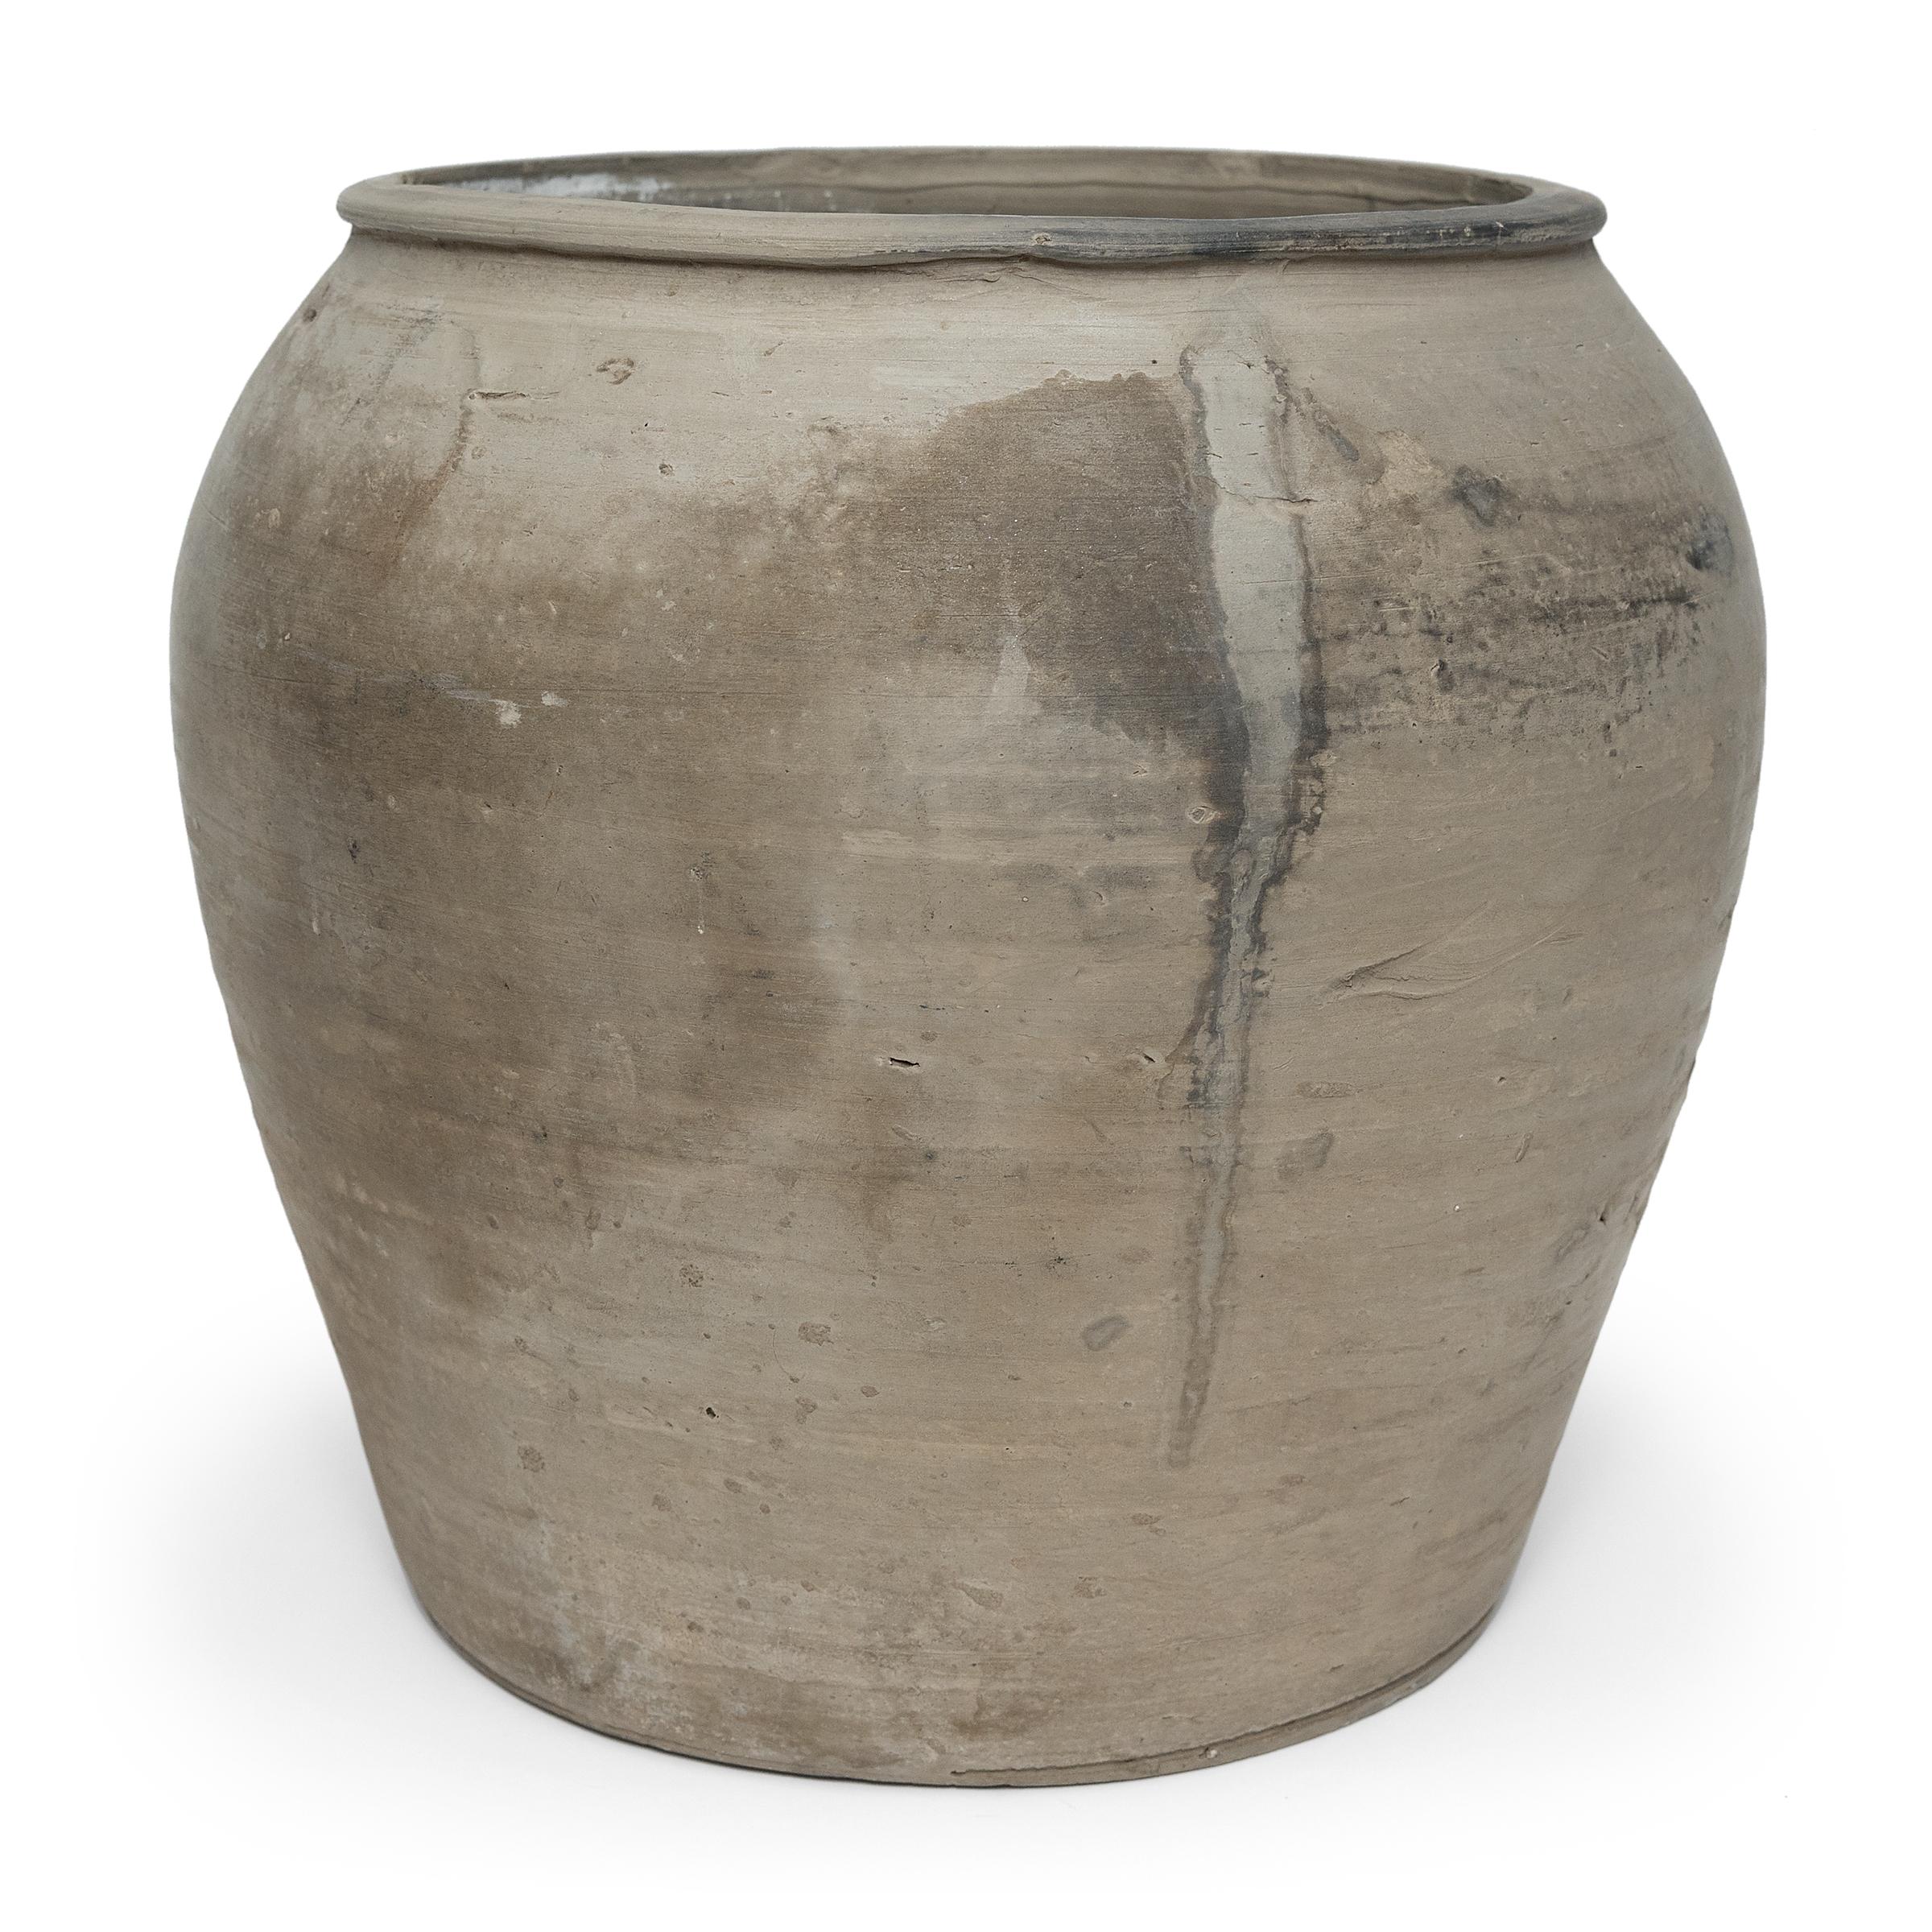 Sculpted during the early 20th century in China's Shanxi province, this vessel has a mottled grey exterior with balanced proportions and a beautifully irregular unglazed surface. Charged with the humble task of storing dry goods, this earthenware